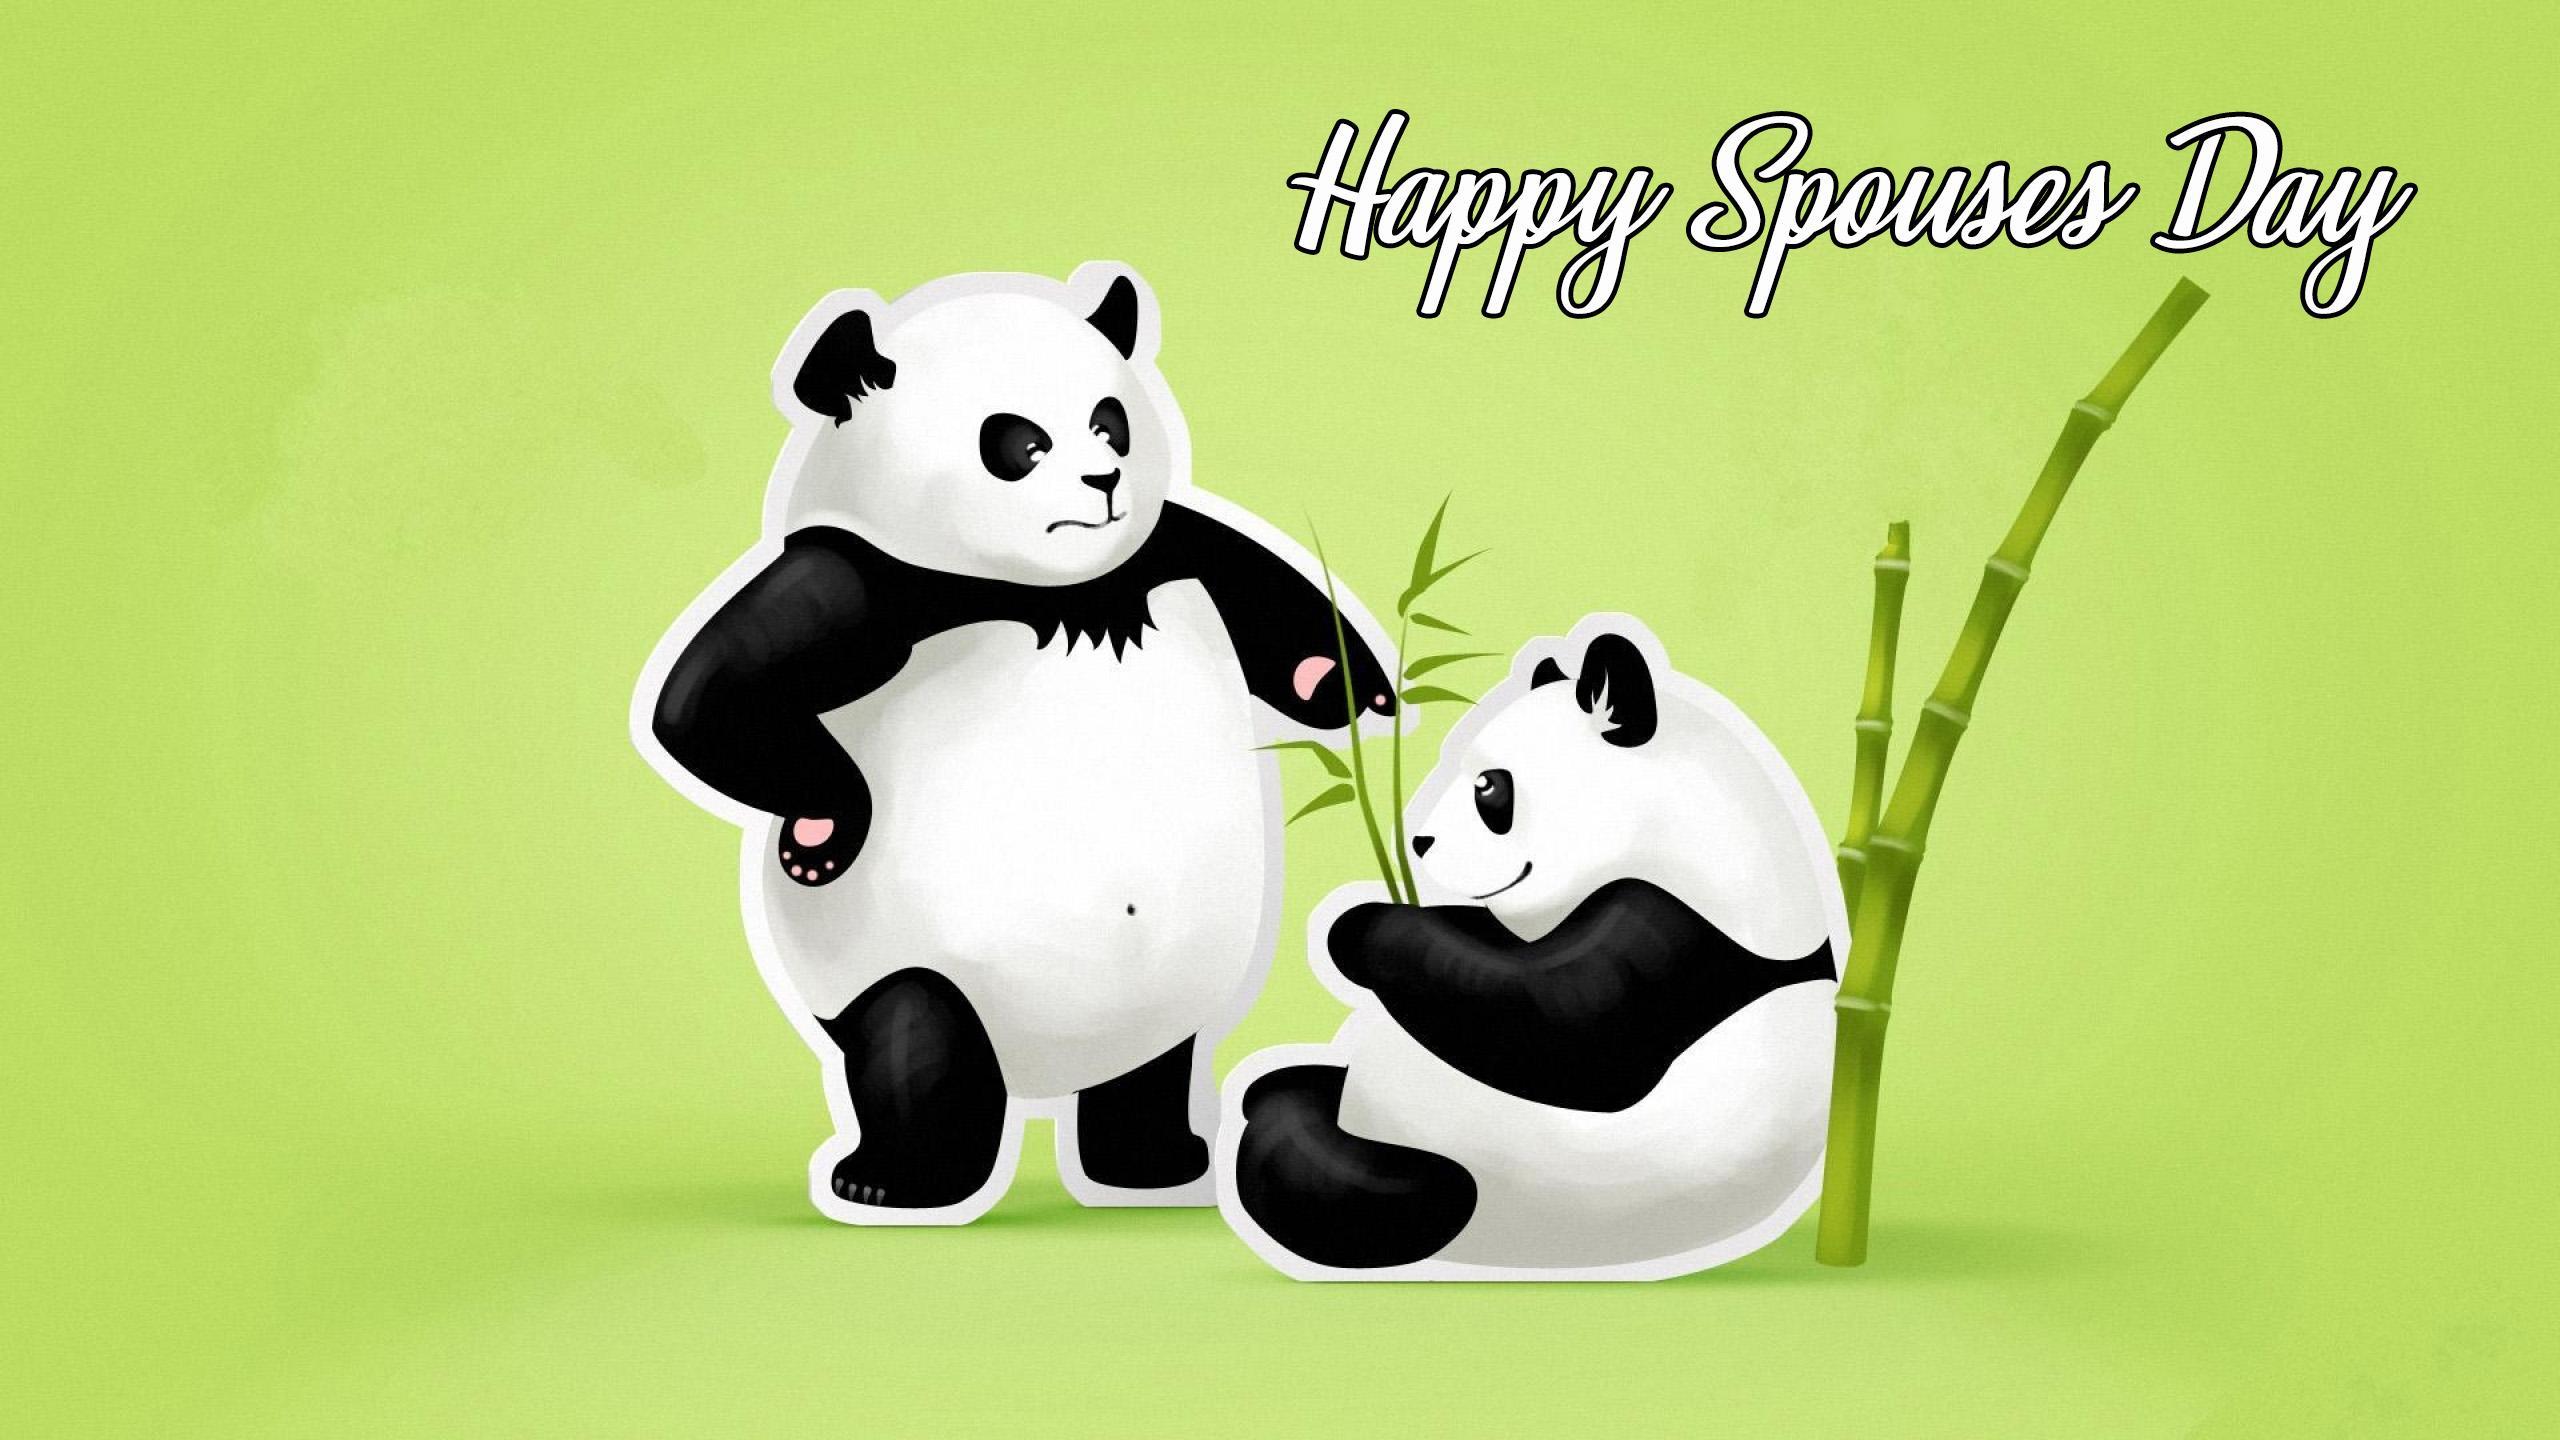 Panda Wallpaper Picture HD Image Free Photo 4K for Android